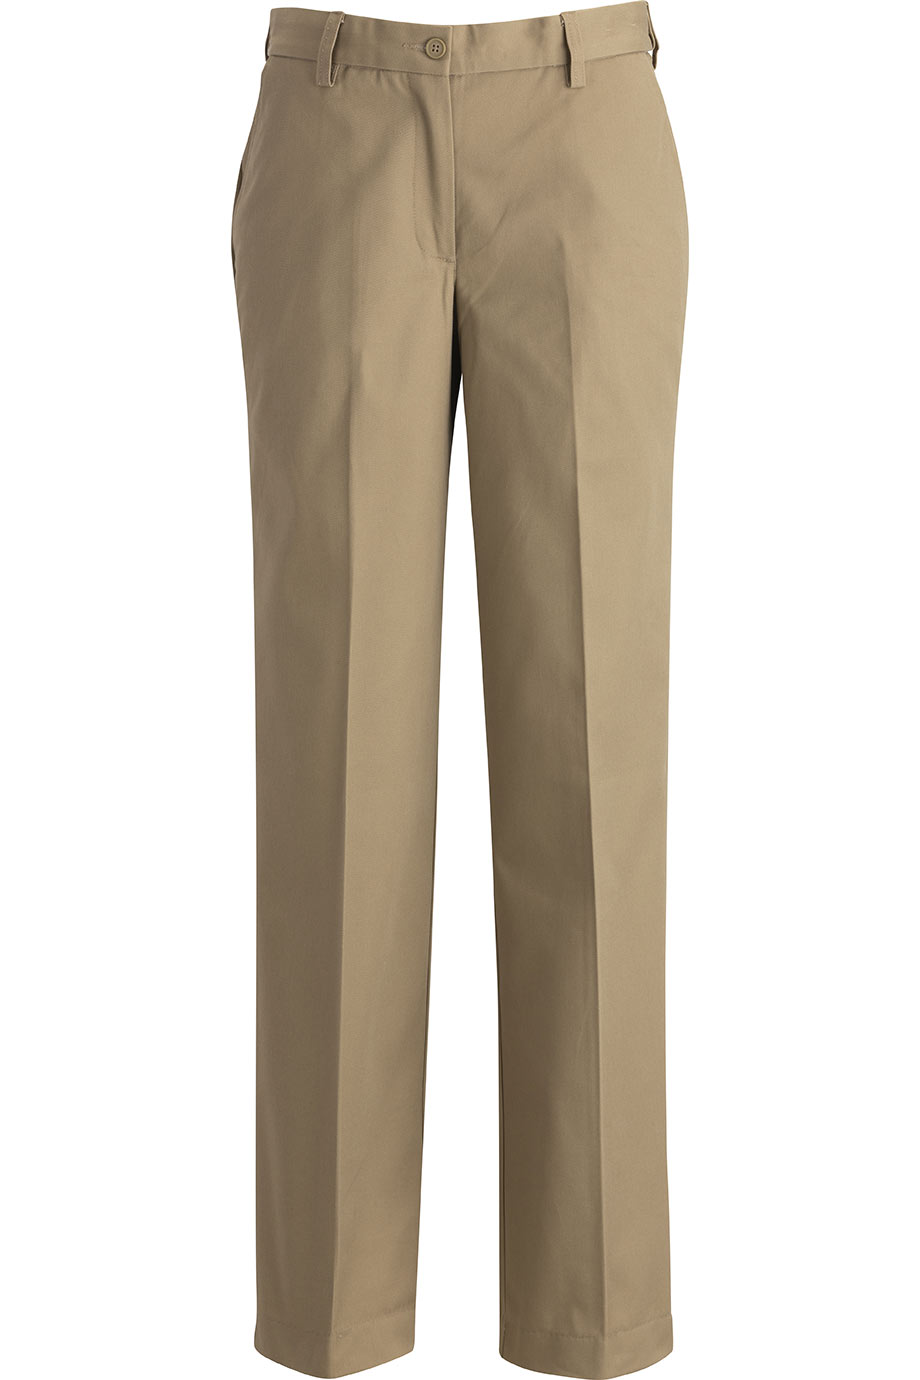 EZ FIT UTILITY CHINO FLAT FRONT PANT